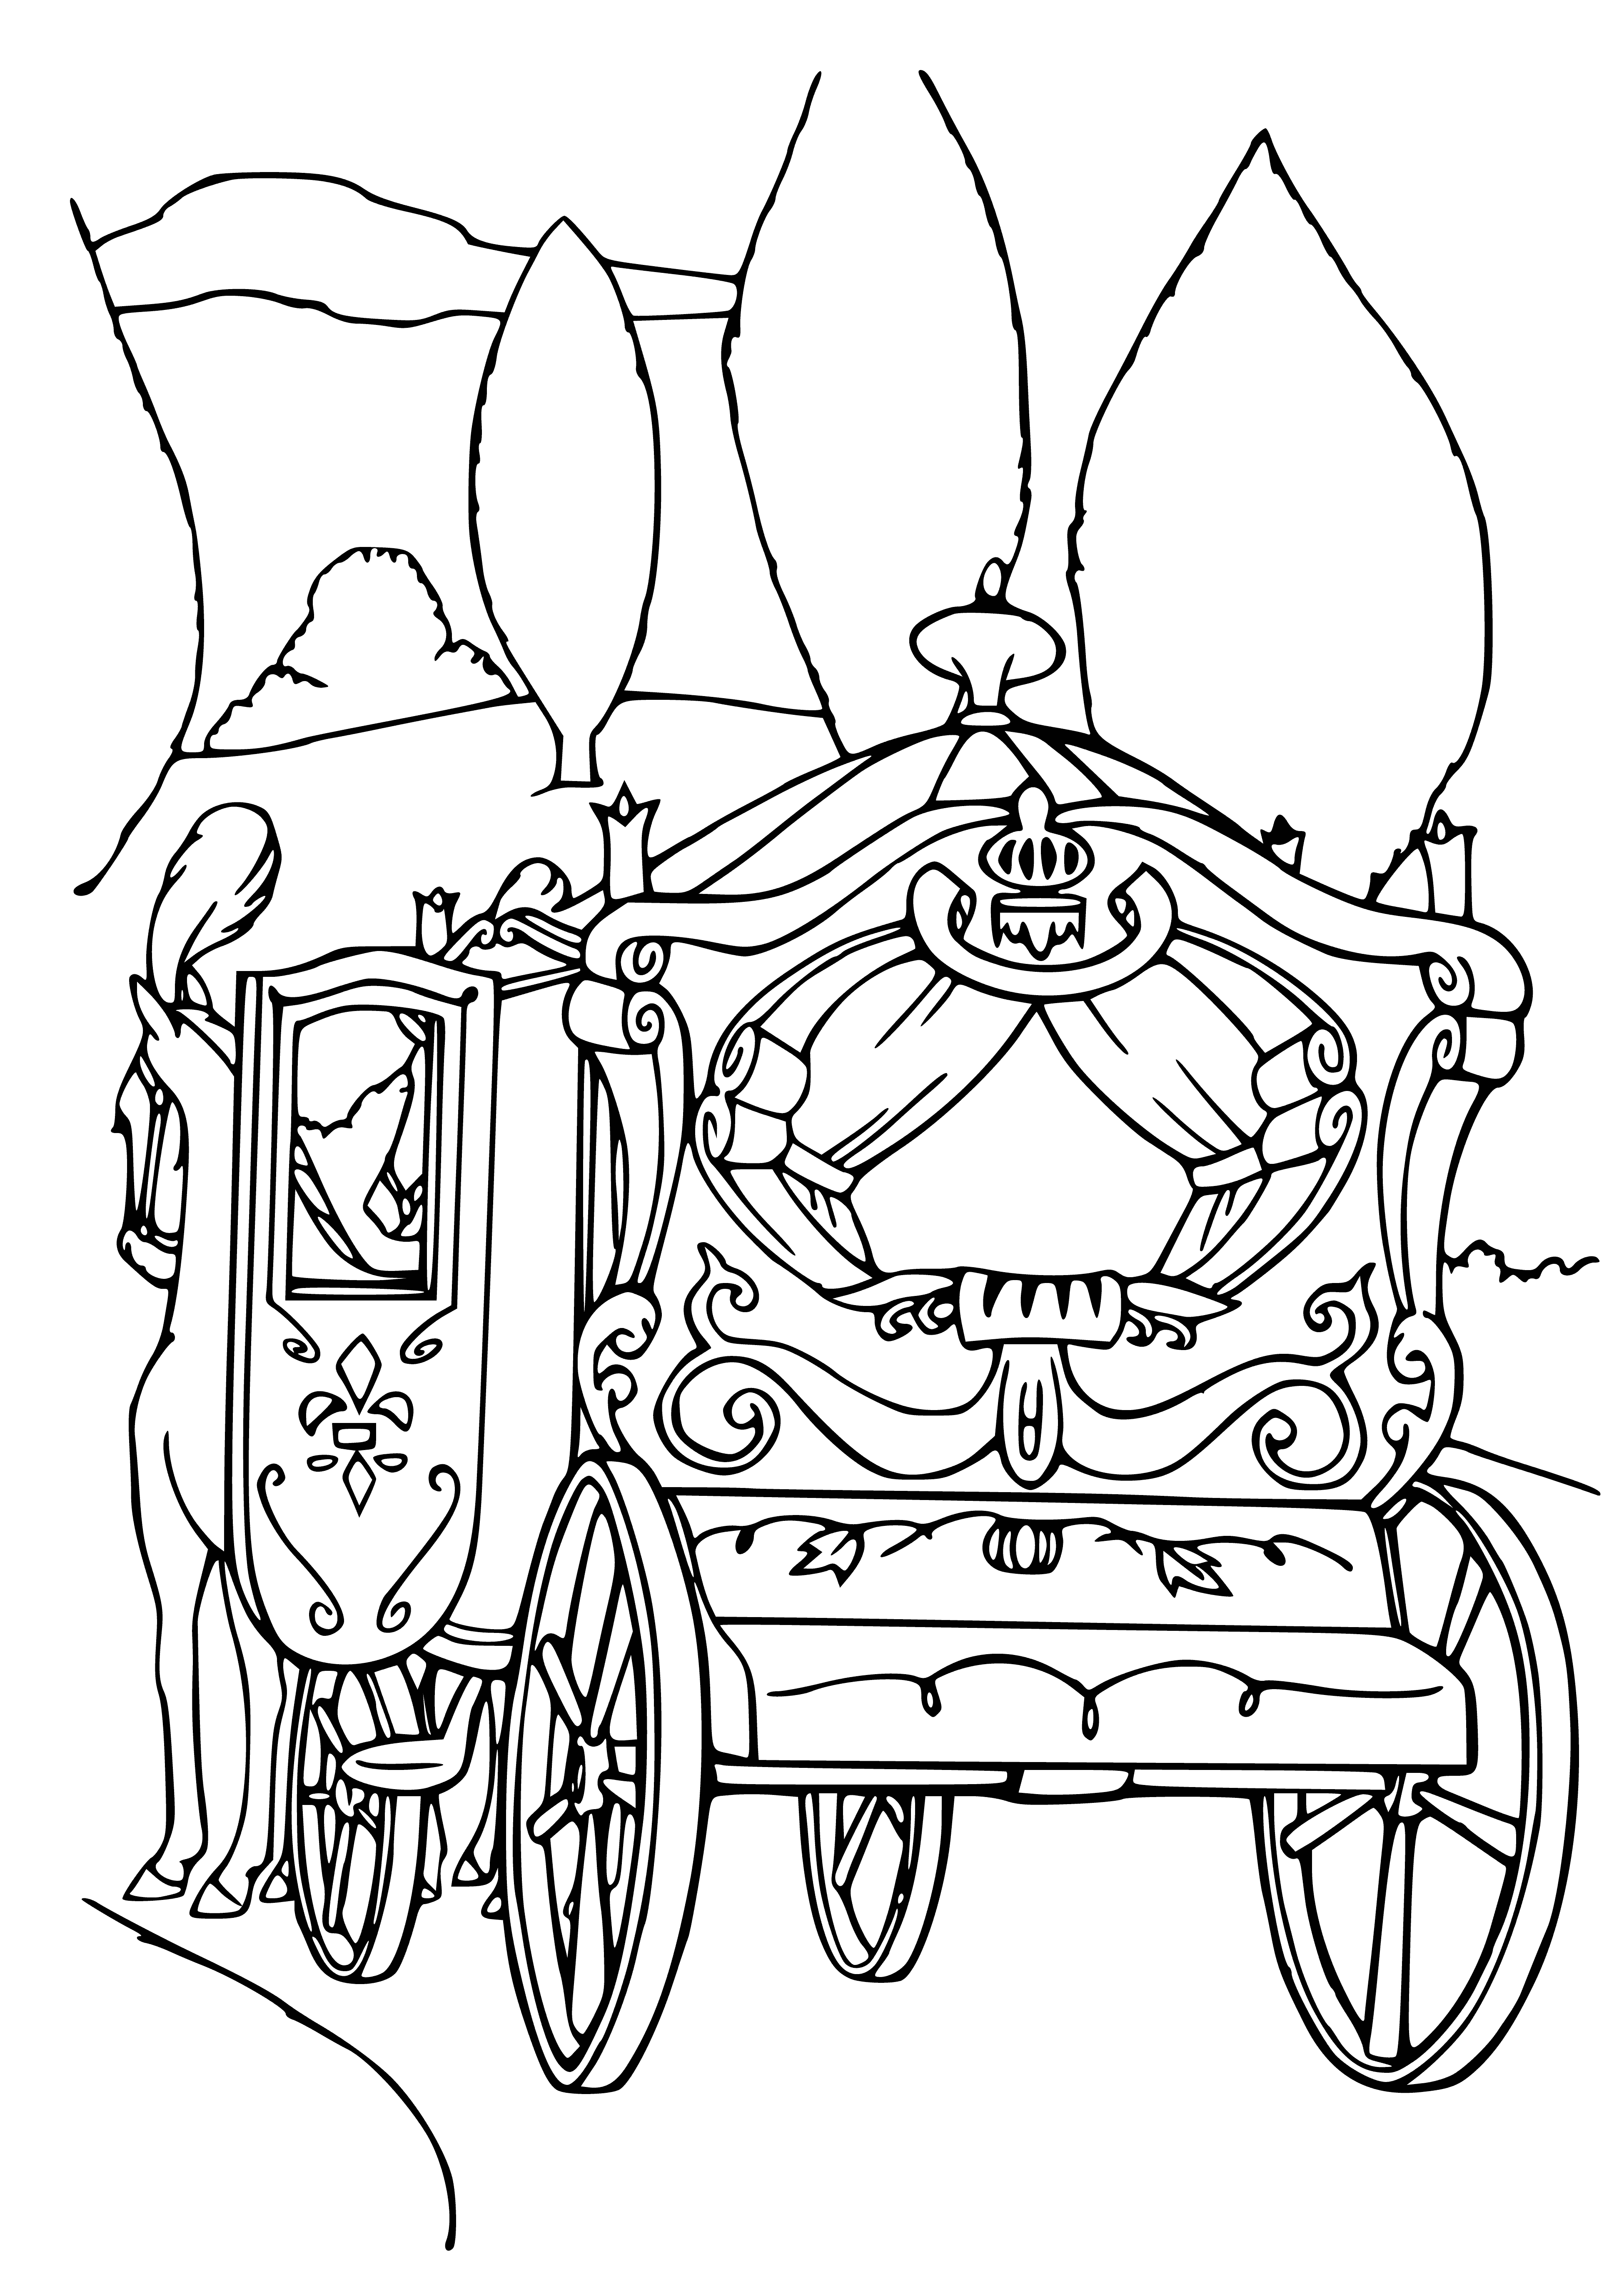 Wonderful end of a fairy tale coloring page